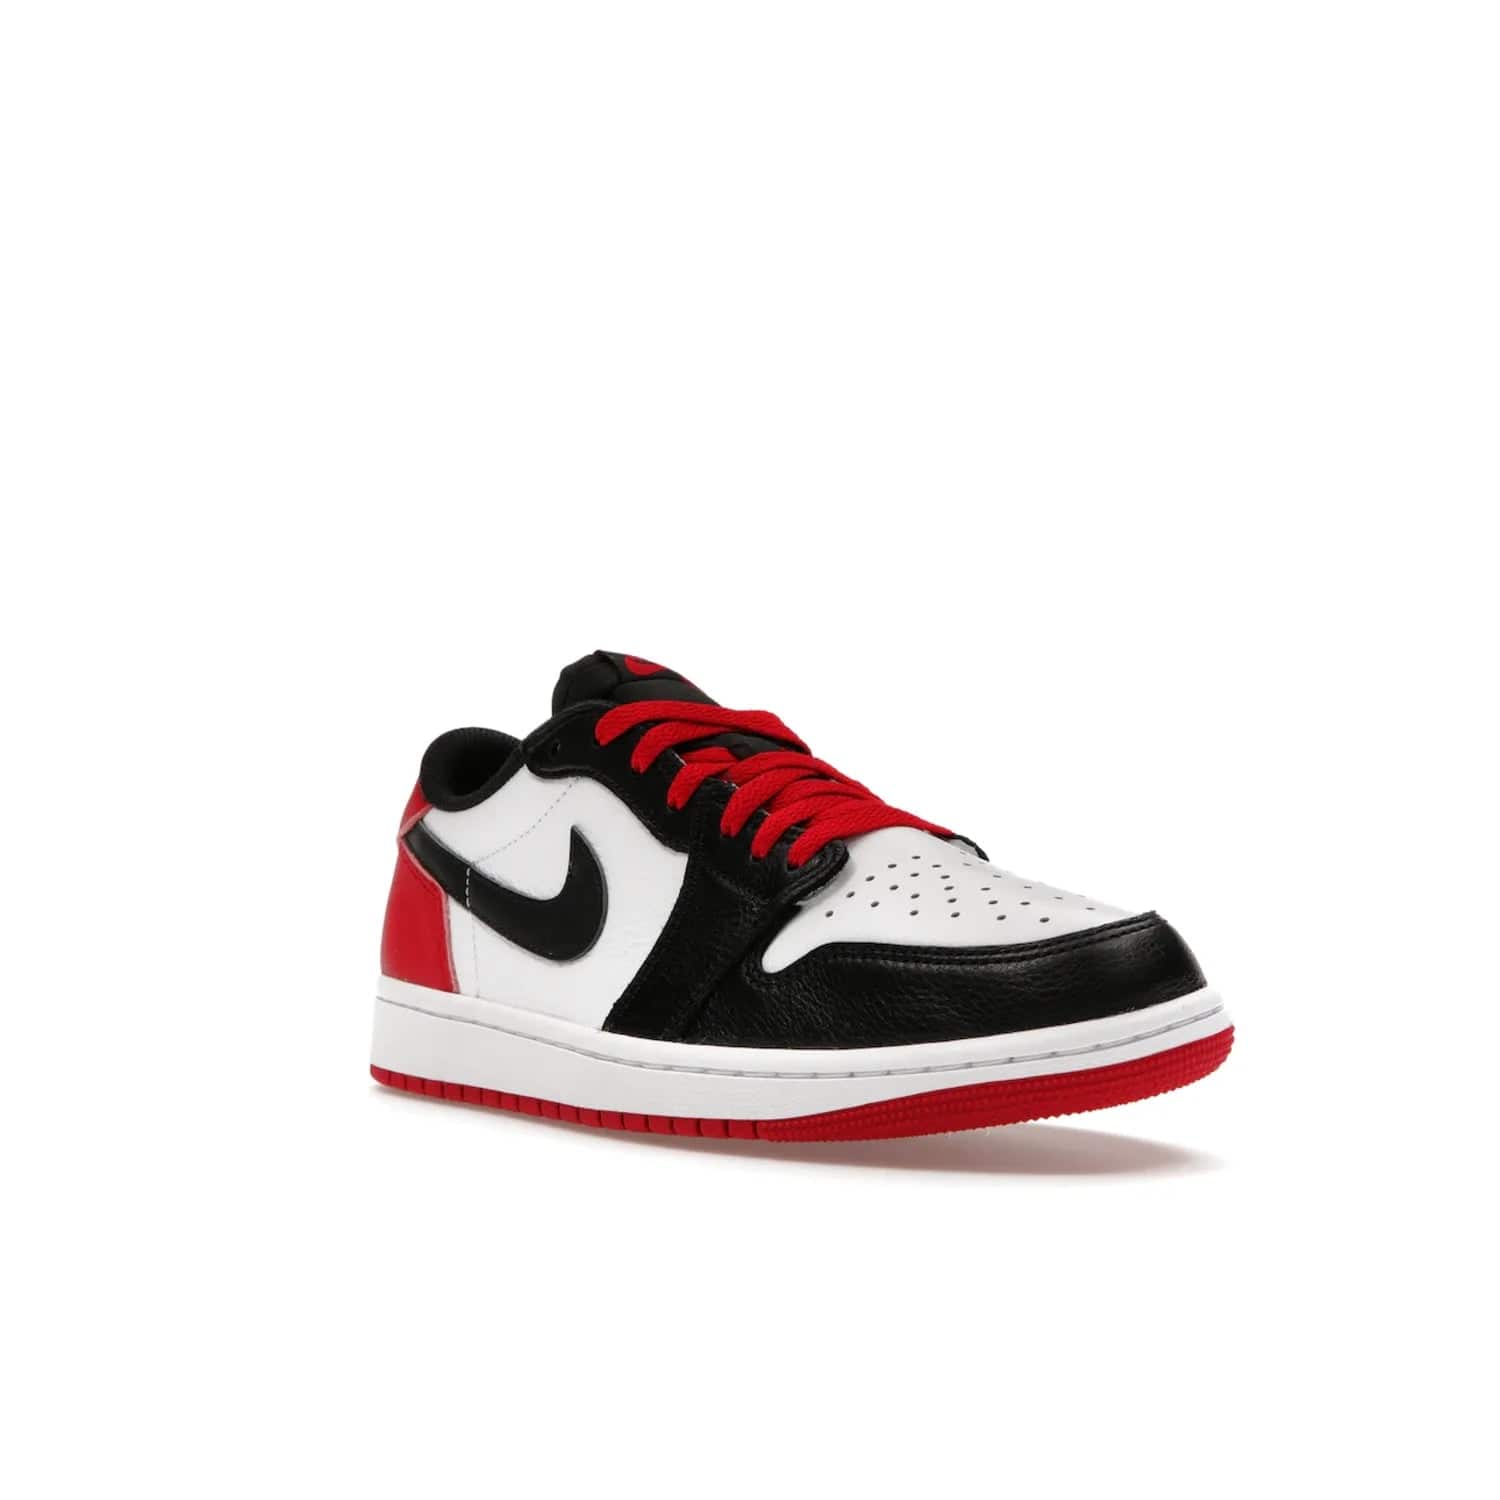 Jordan 1 Retro Low OG Black Toe (2023) - Image 6 - Only at www.BallersClubKickz.com - Upgrade your wardrobe with the Jordan 1 Retro Low OG Black Toe featuring a classic black and white upper and dynamic red heel counter. Eye-catching white midsole and iconic black Swoosh and Wings complete the timeless yet modern look. Shop now to own this iconic shoe!